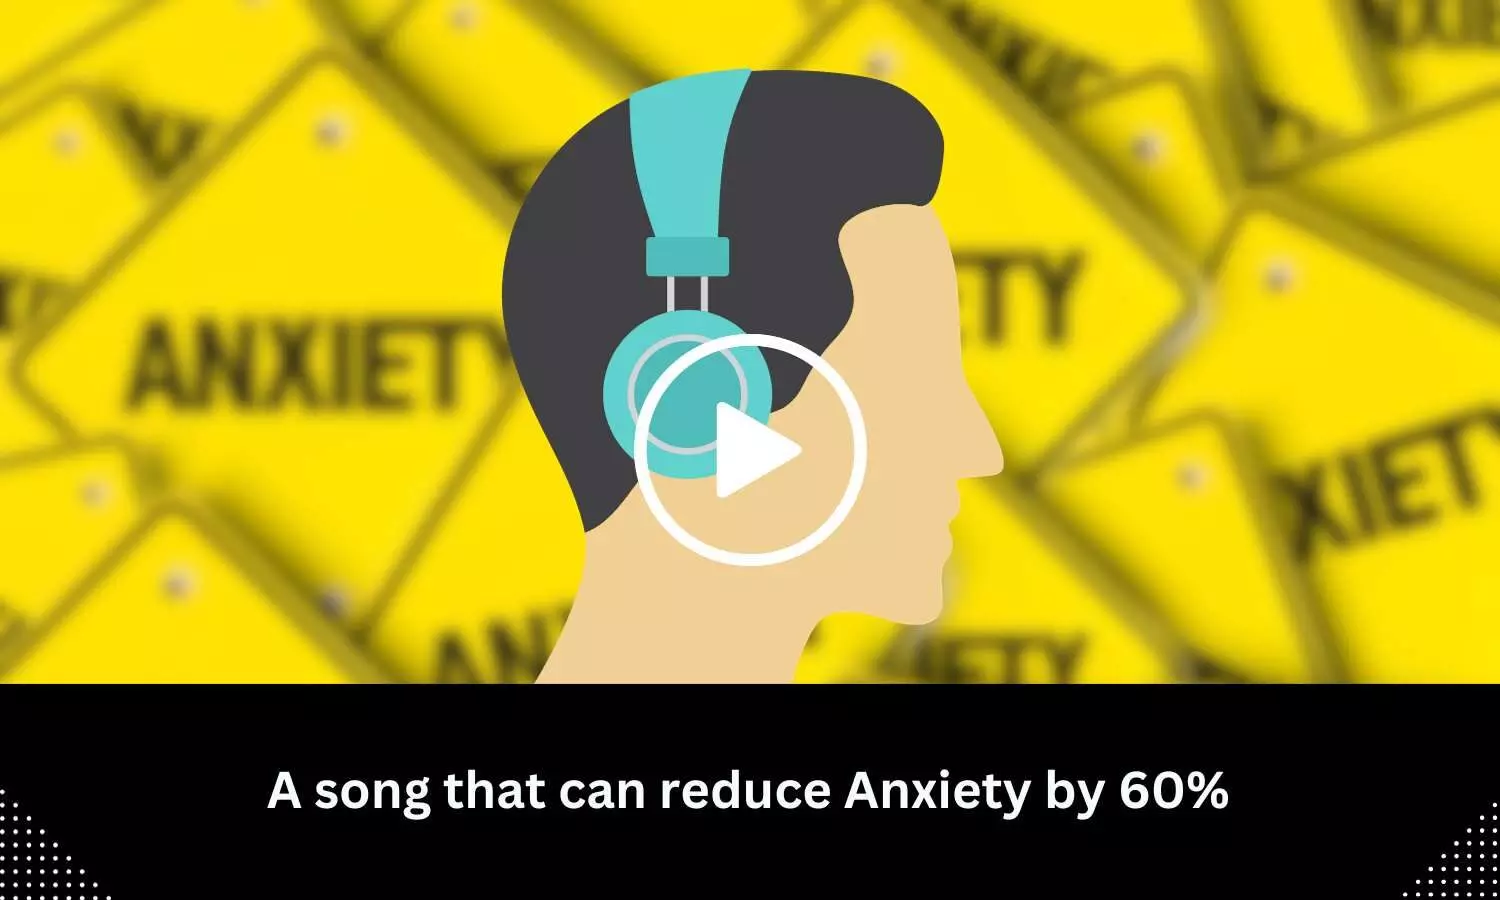 A song that can reduce Anxiety by 60%